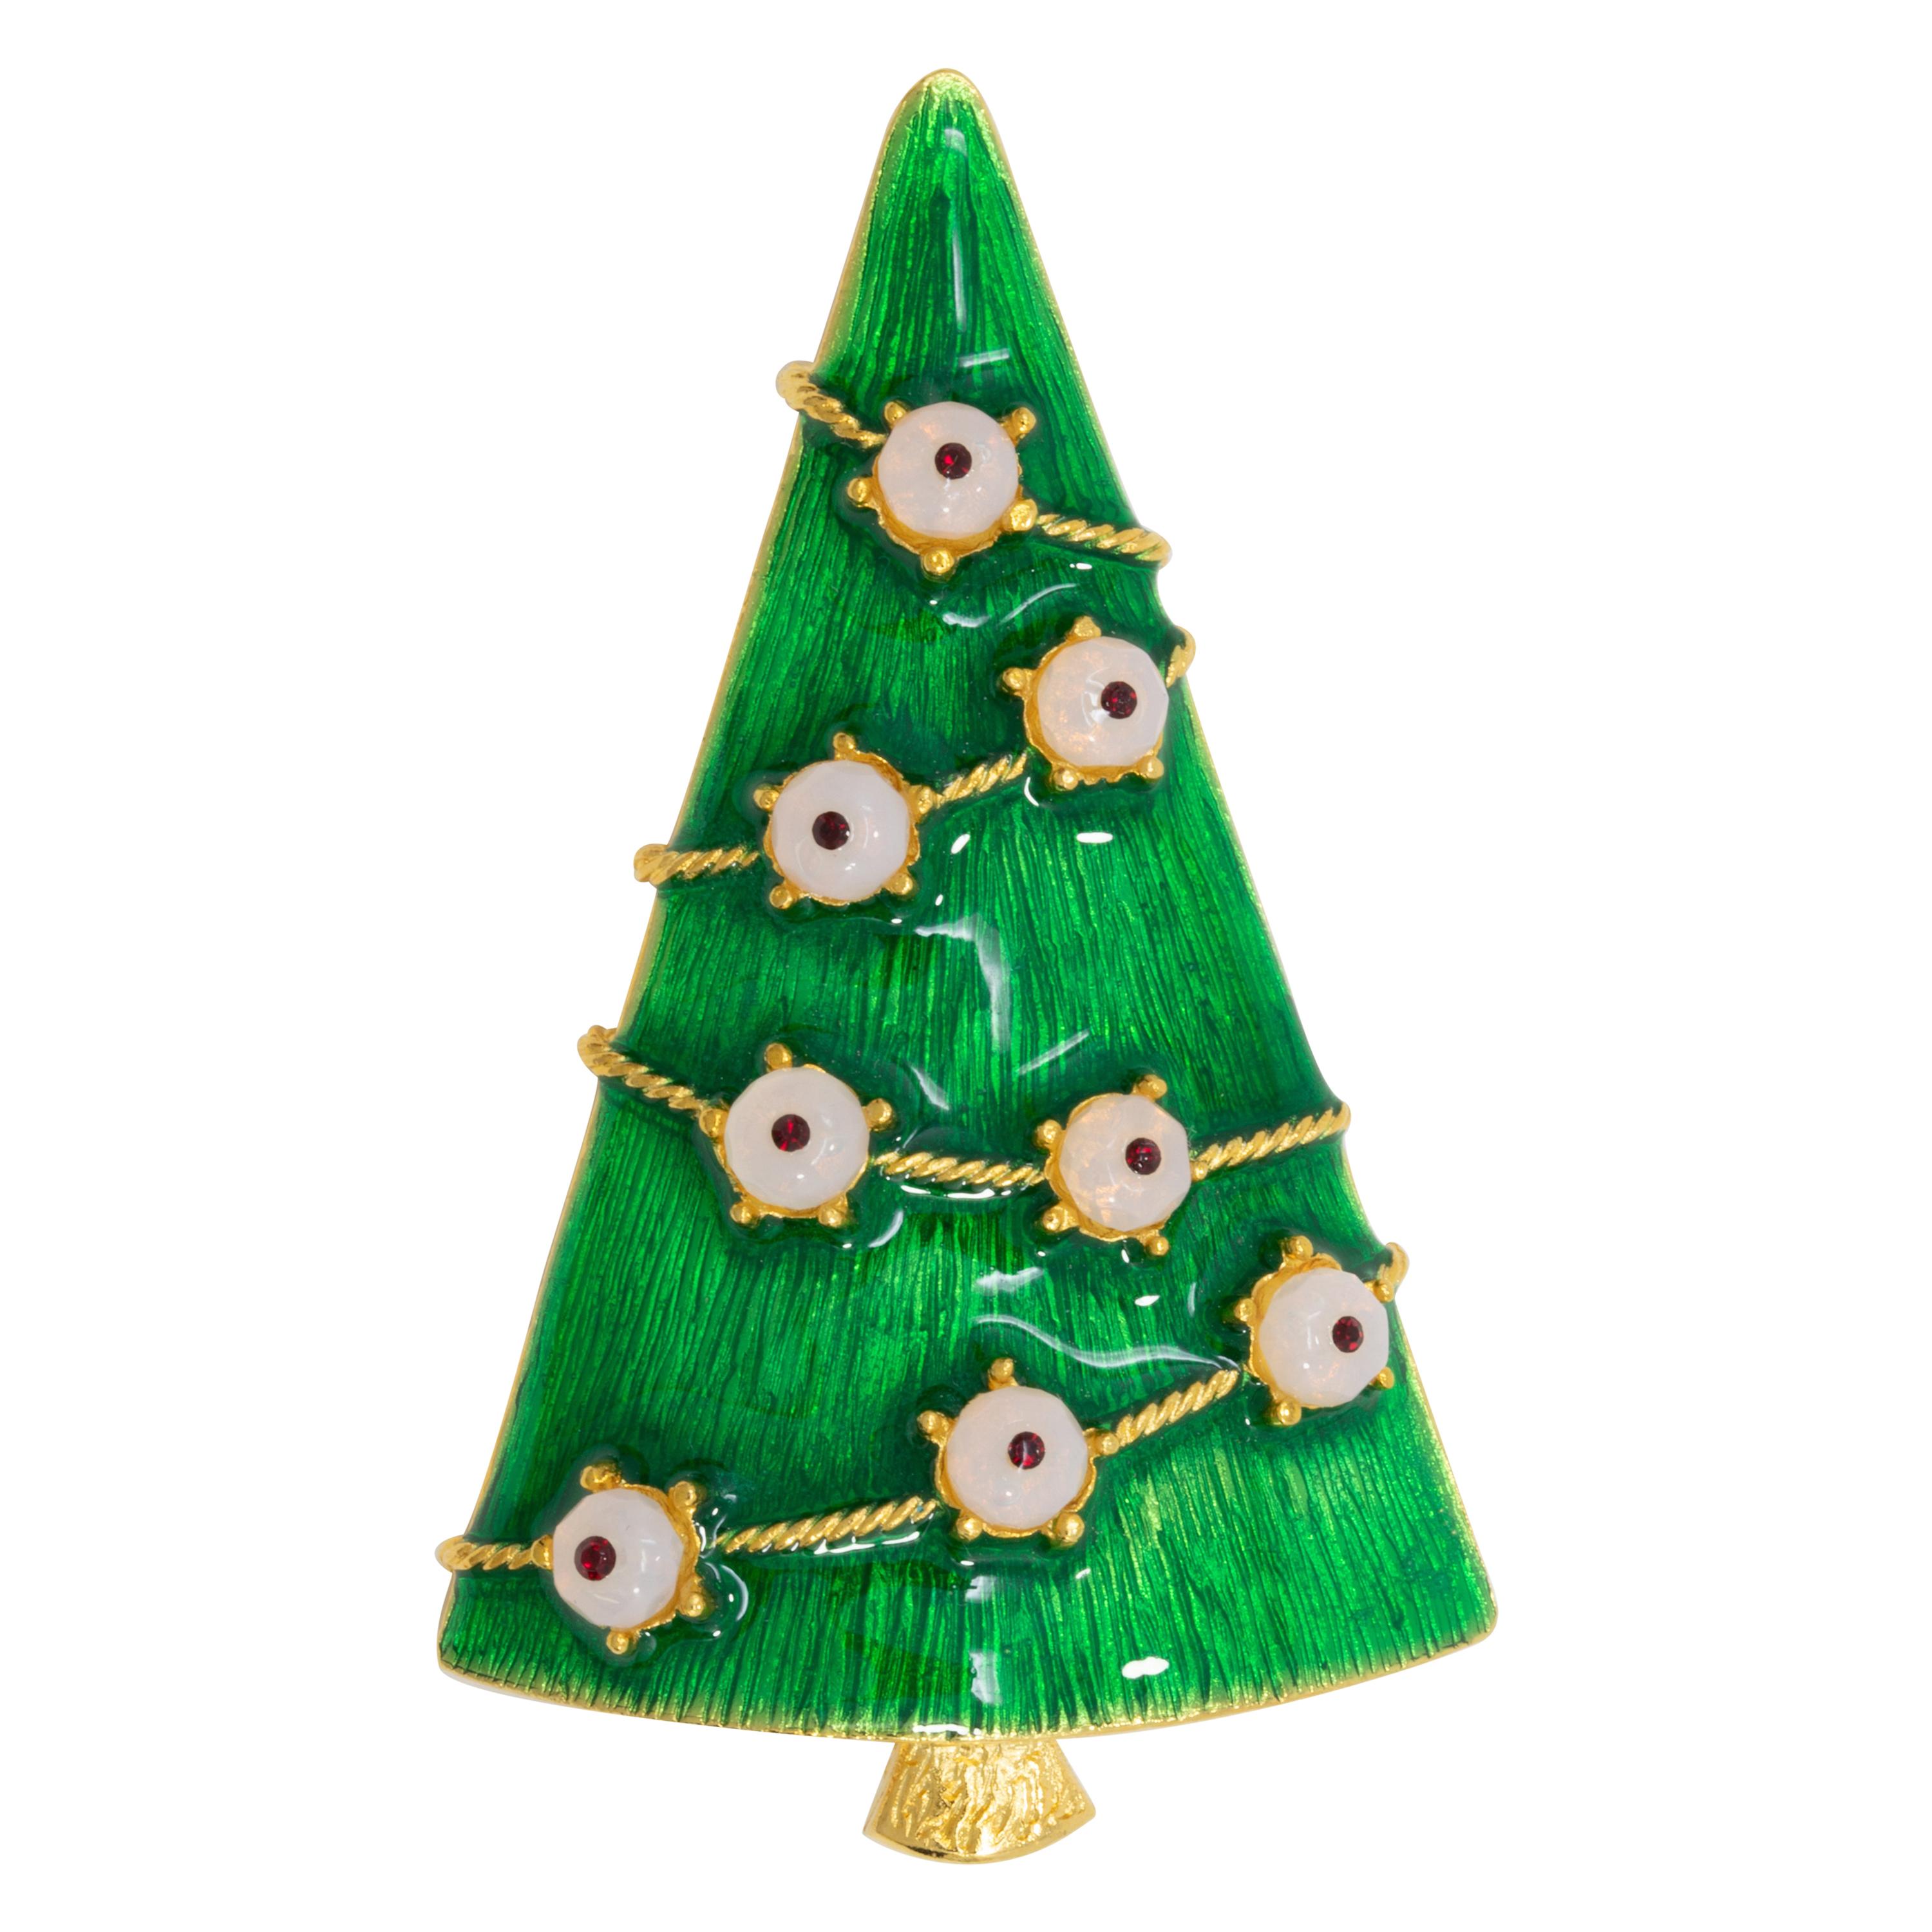 LIA Gold Christmas Tree Pin and Brooch, Green Enamel, White Glass Ornaments